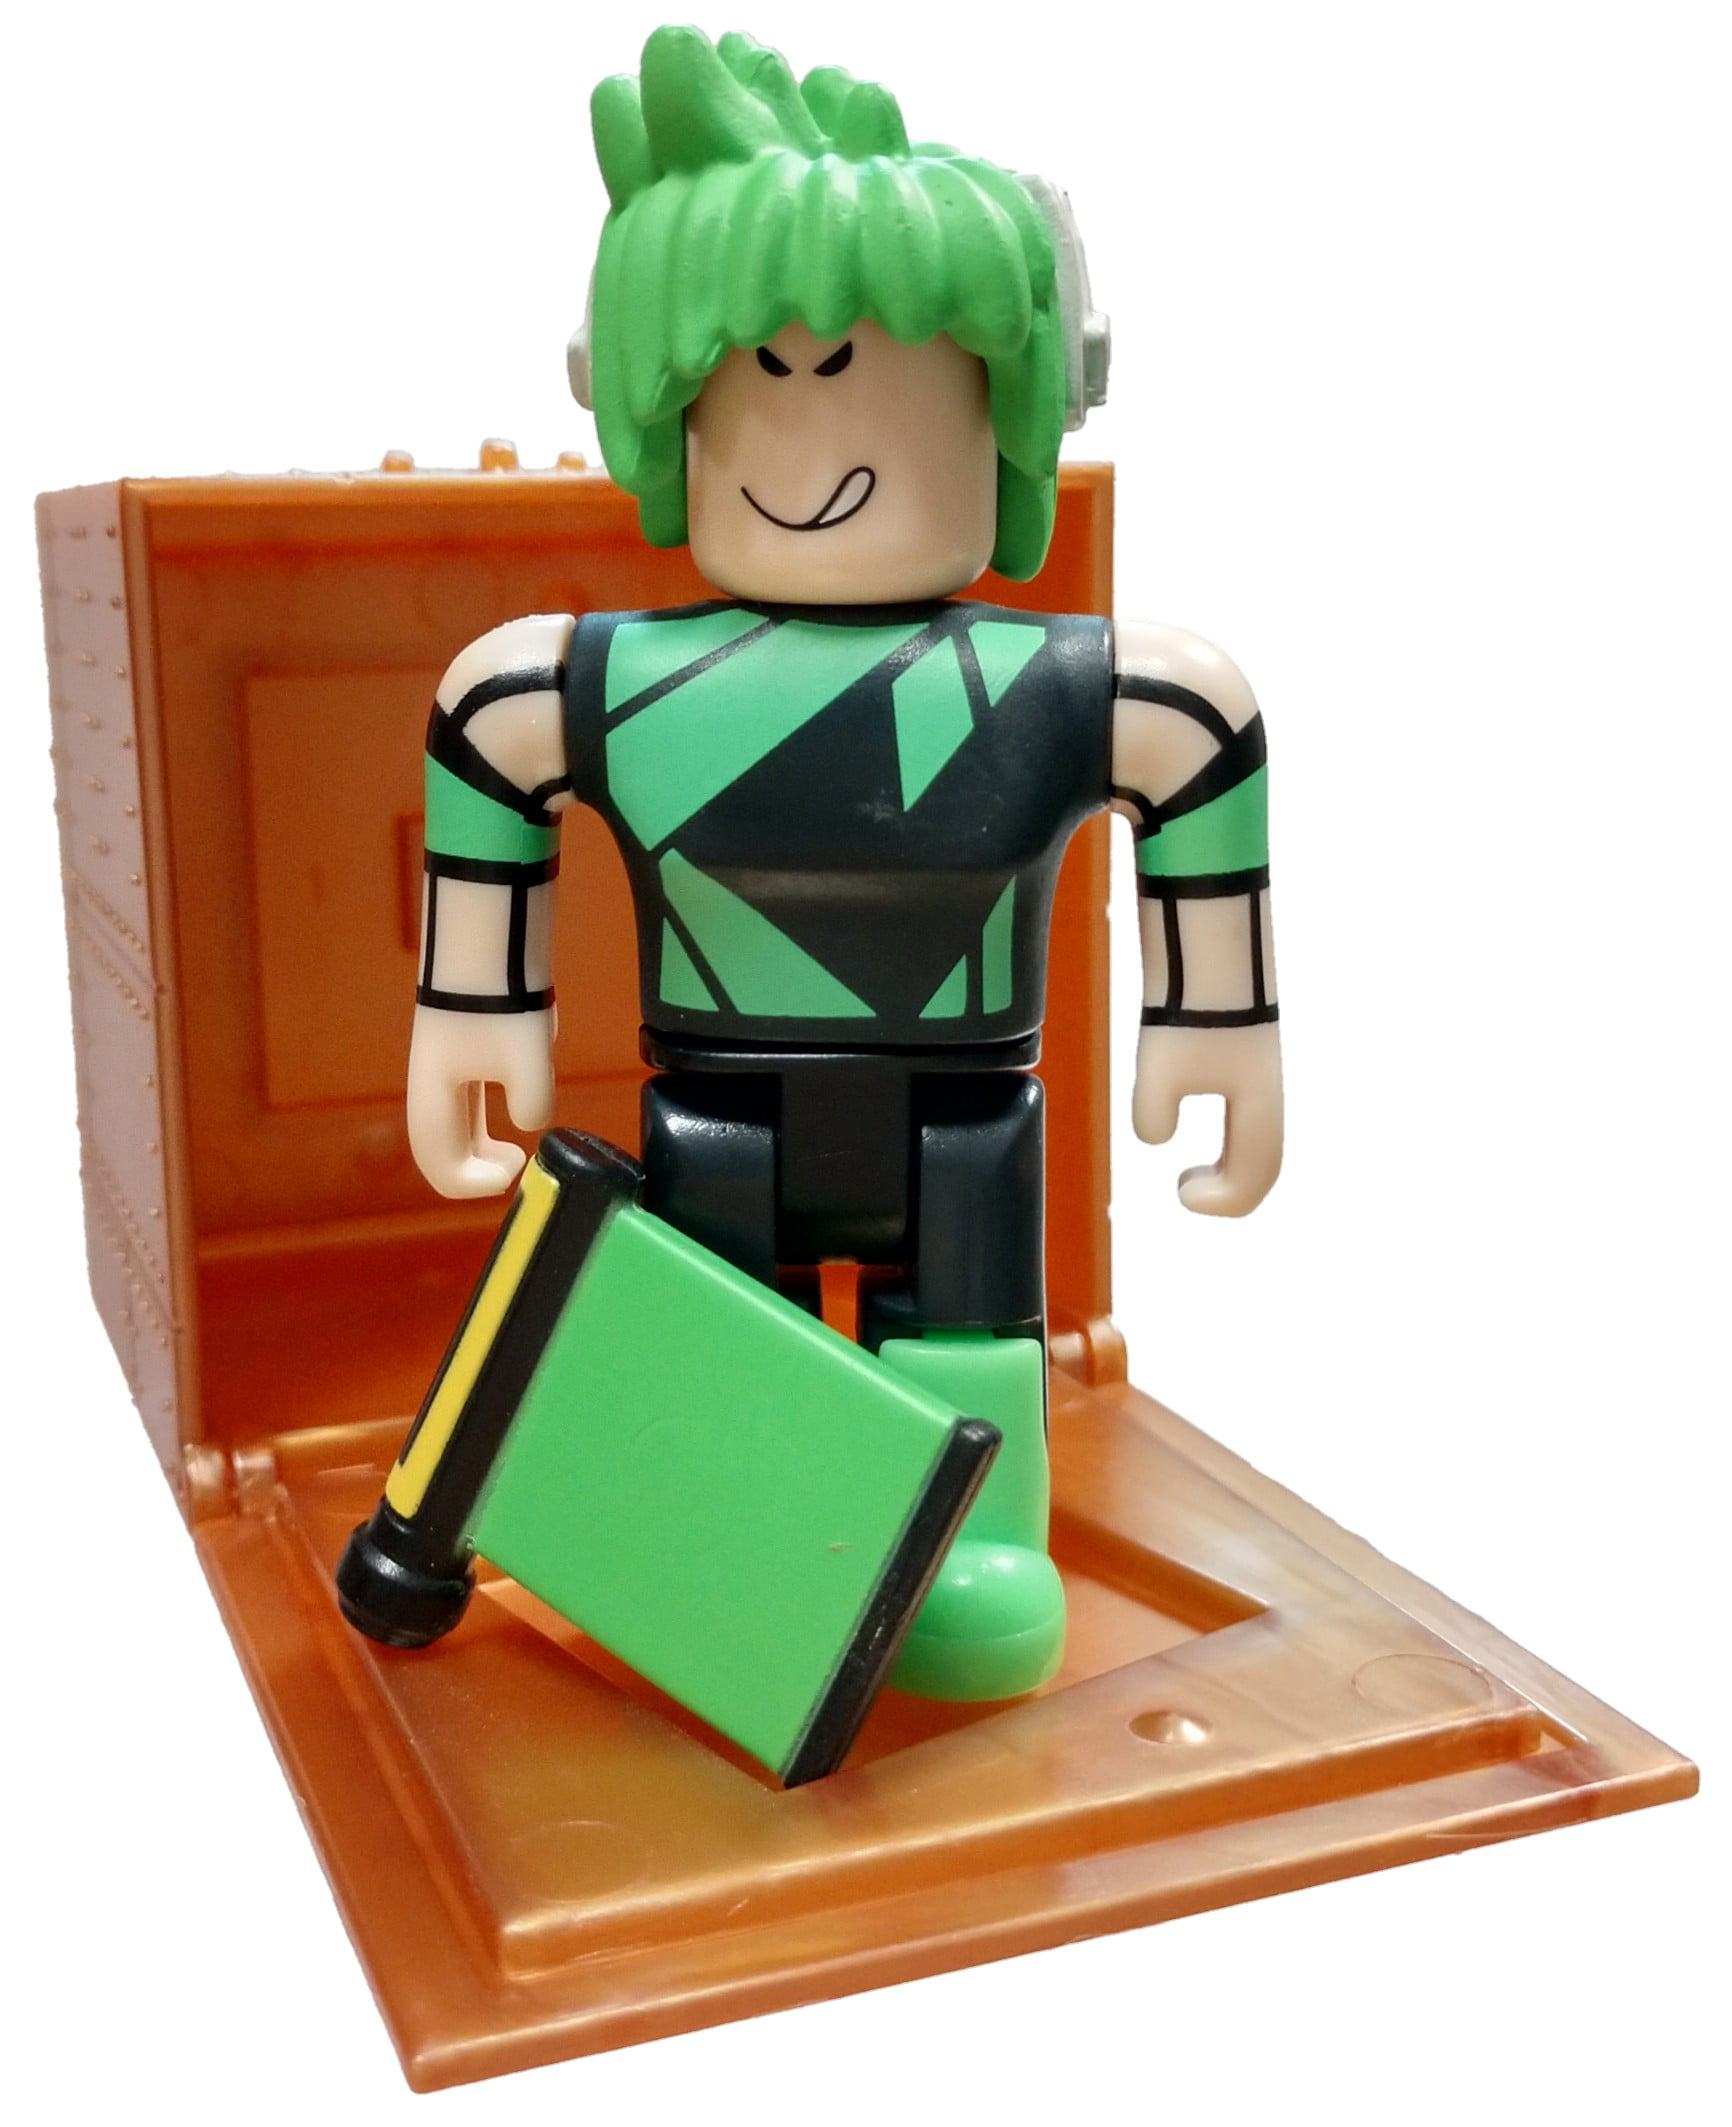 Roblox Series 8 Texting Simulator Future Tech Boy Mini Figure With Cube And Online Code No Packaging Walmart Com Walmart Com - roblox texting code